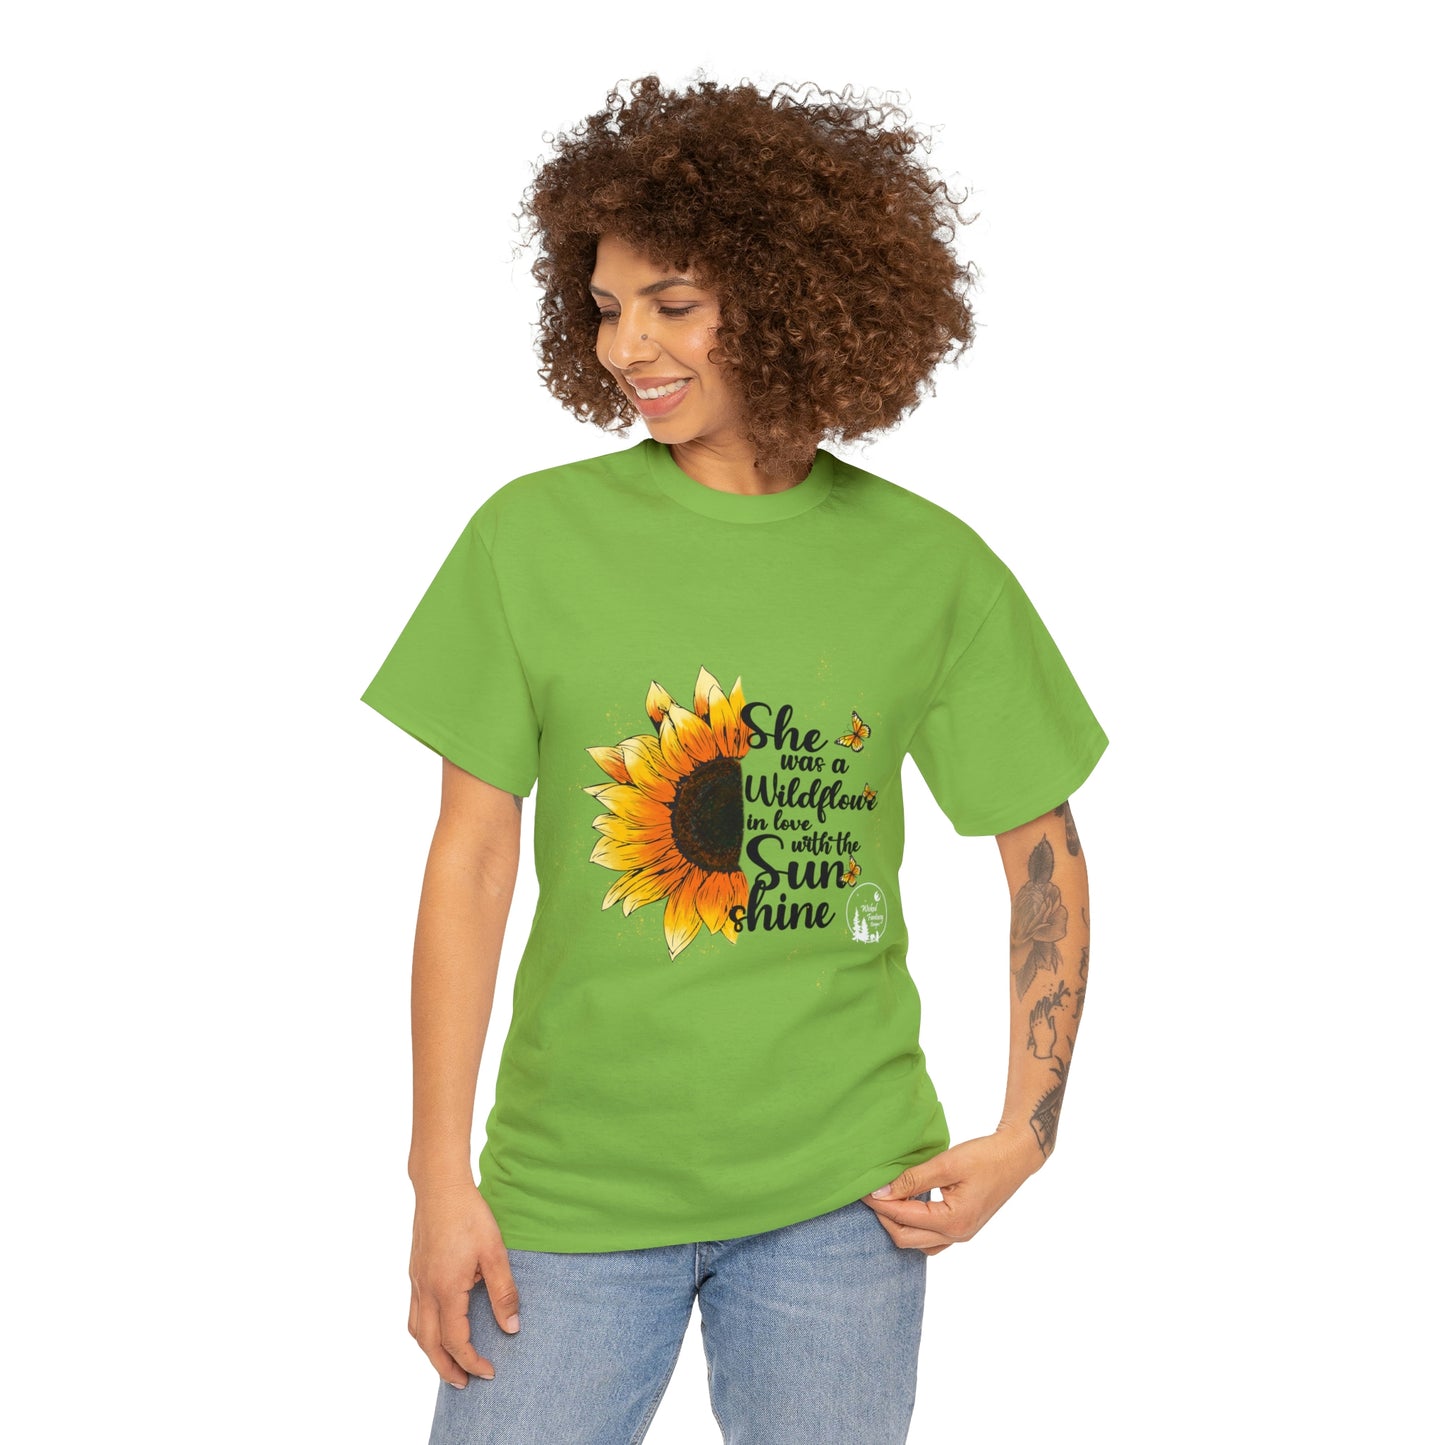 She Was a Wildflower in Love with the Sunshine Sunflower Heavy Cotton Tee